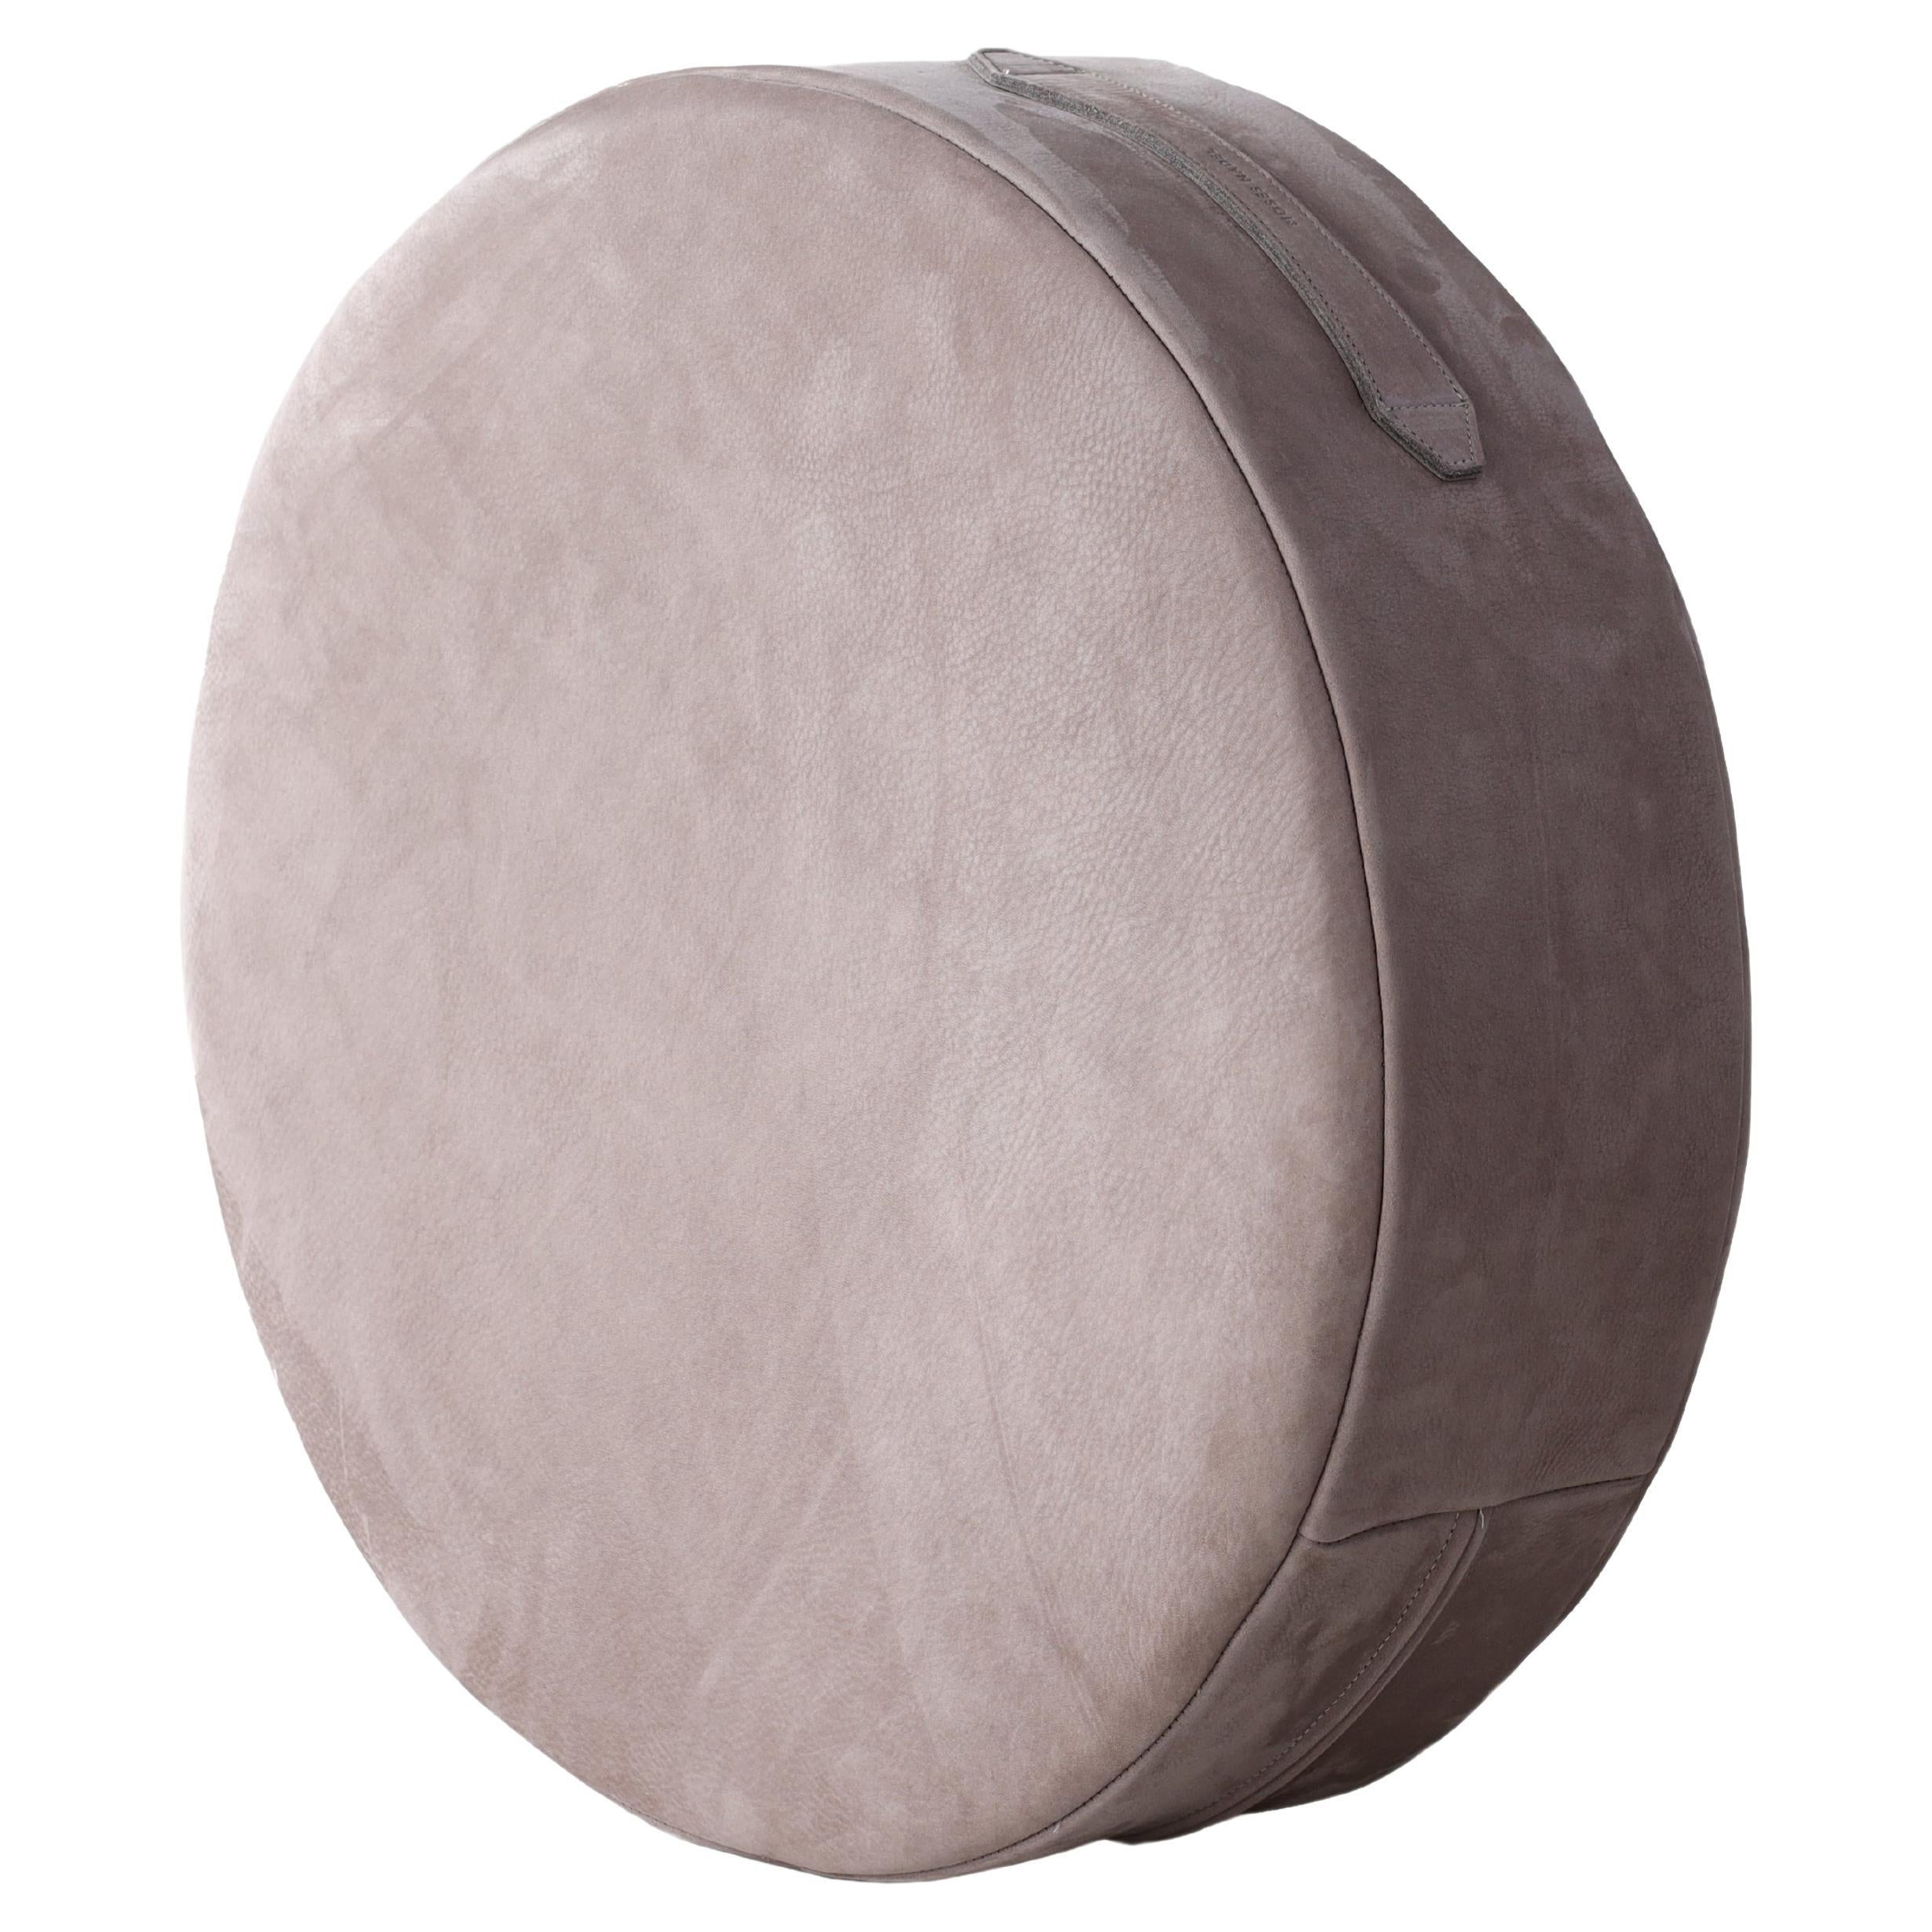 20"Ø x 5" Puck Floor Cushion in Storm Nubuck Leather by Moses Nadel For Sale